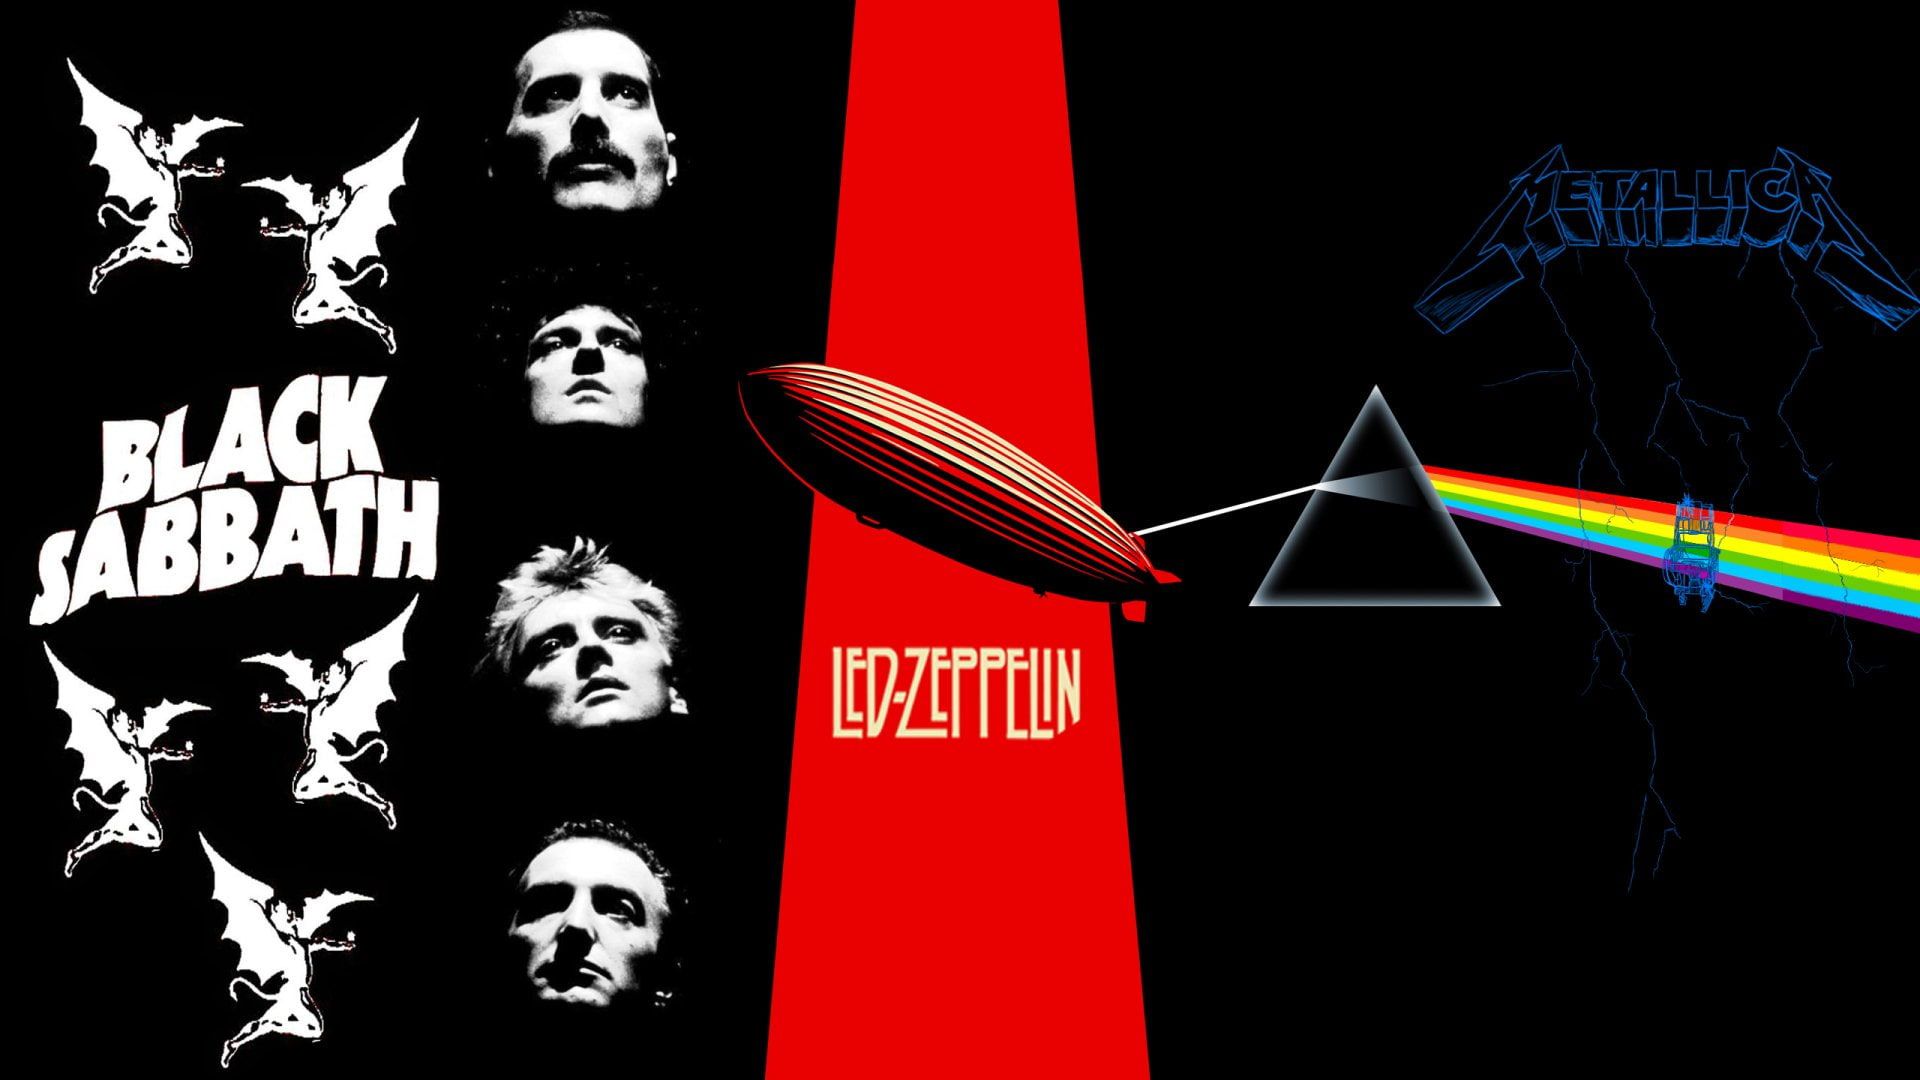 Black Sabbath, Led Zeppelin, Metallica, and Pink Floyd are some of the most influential bands in rock history. - Rock